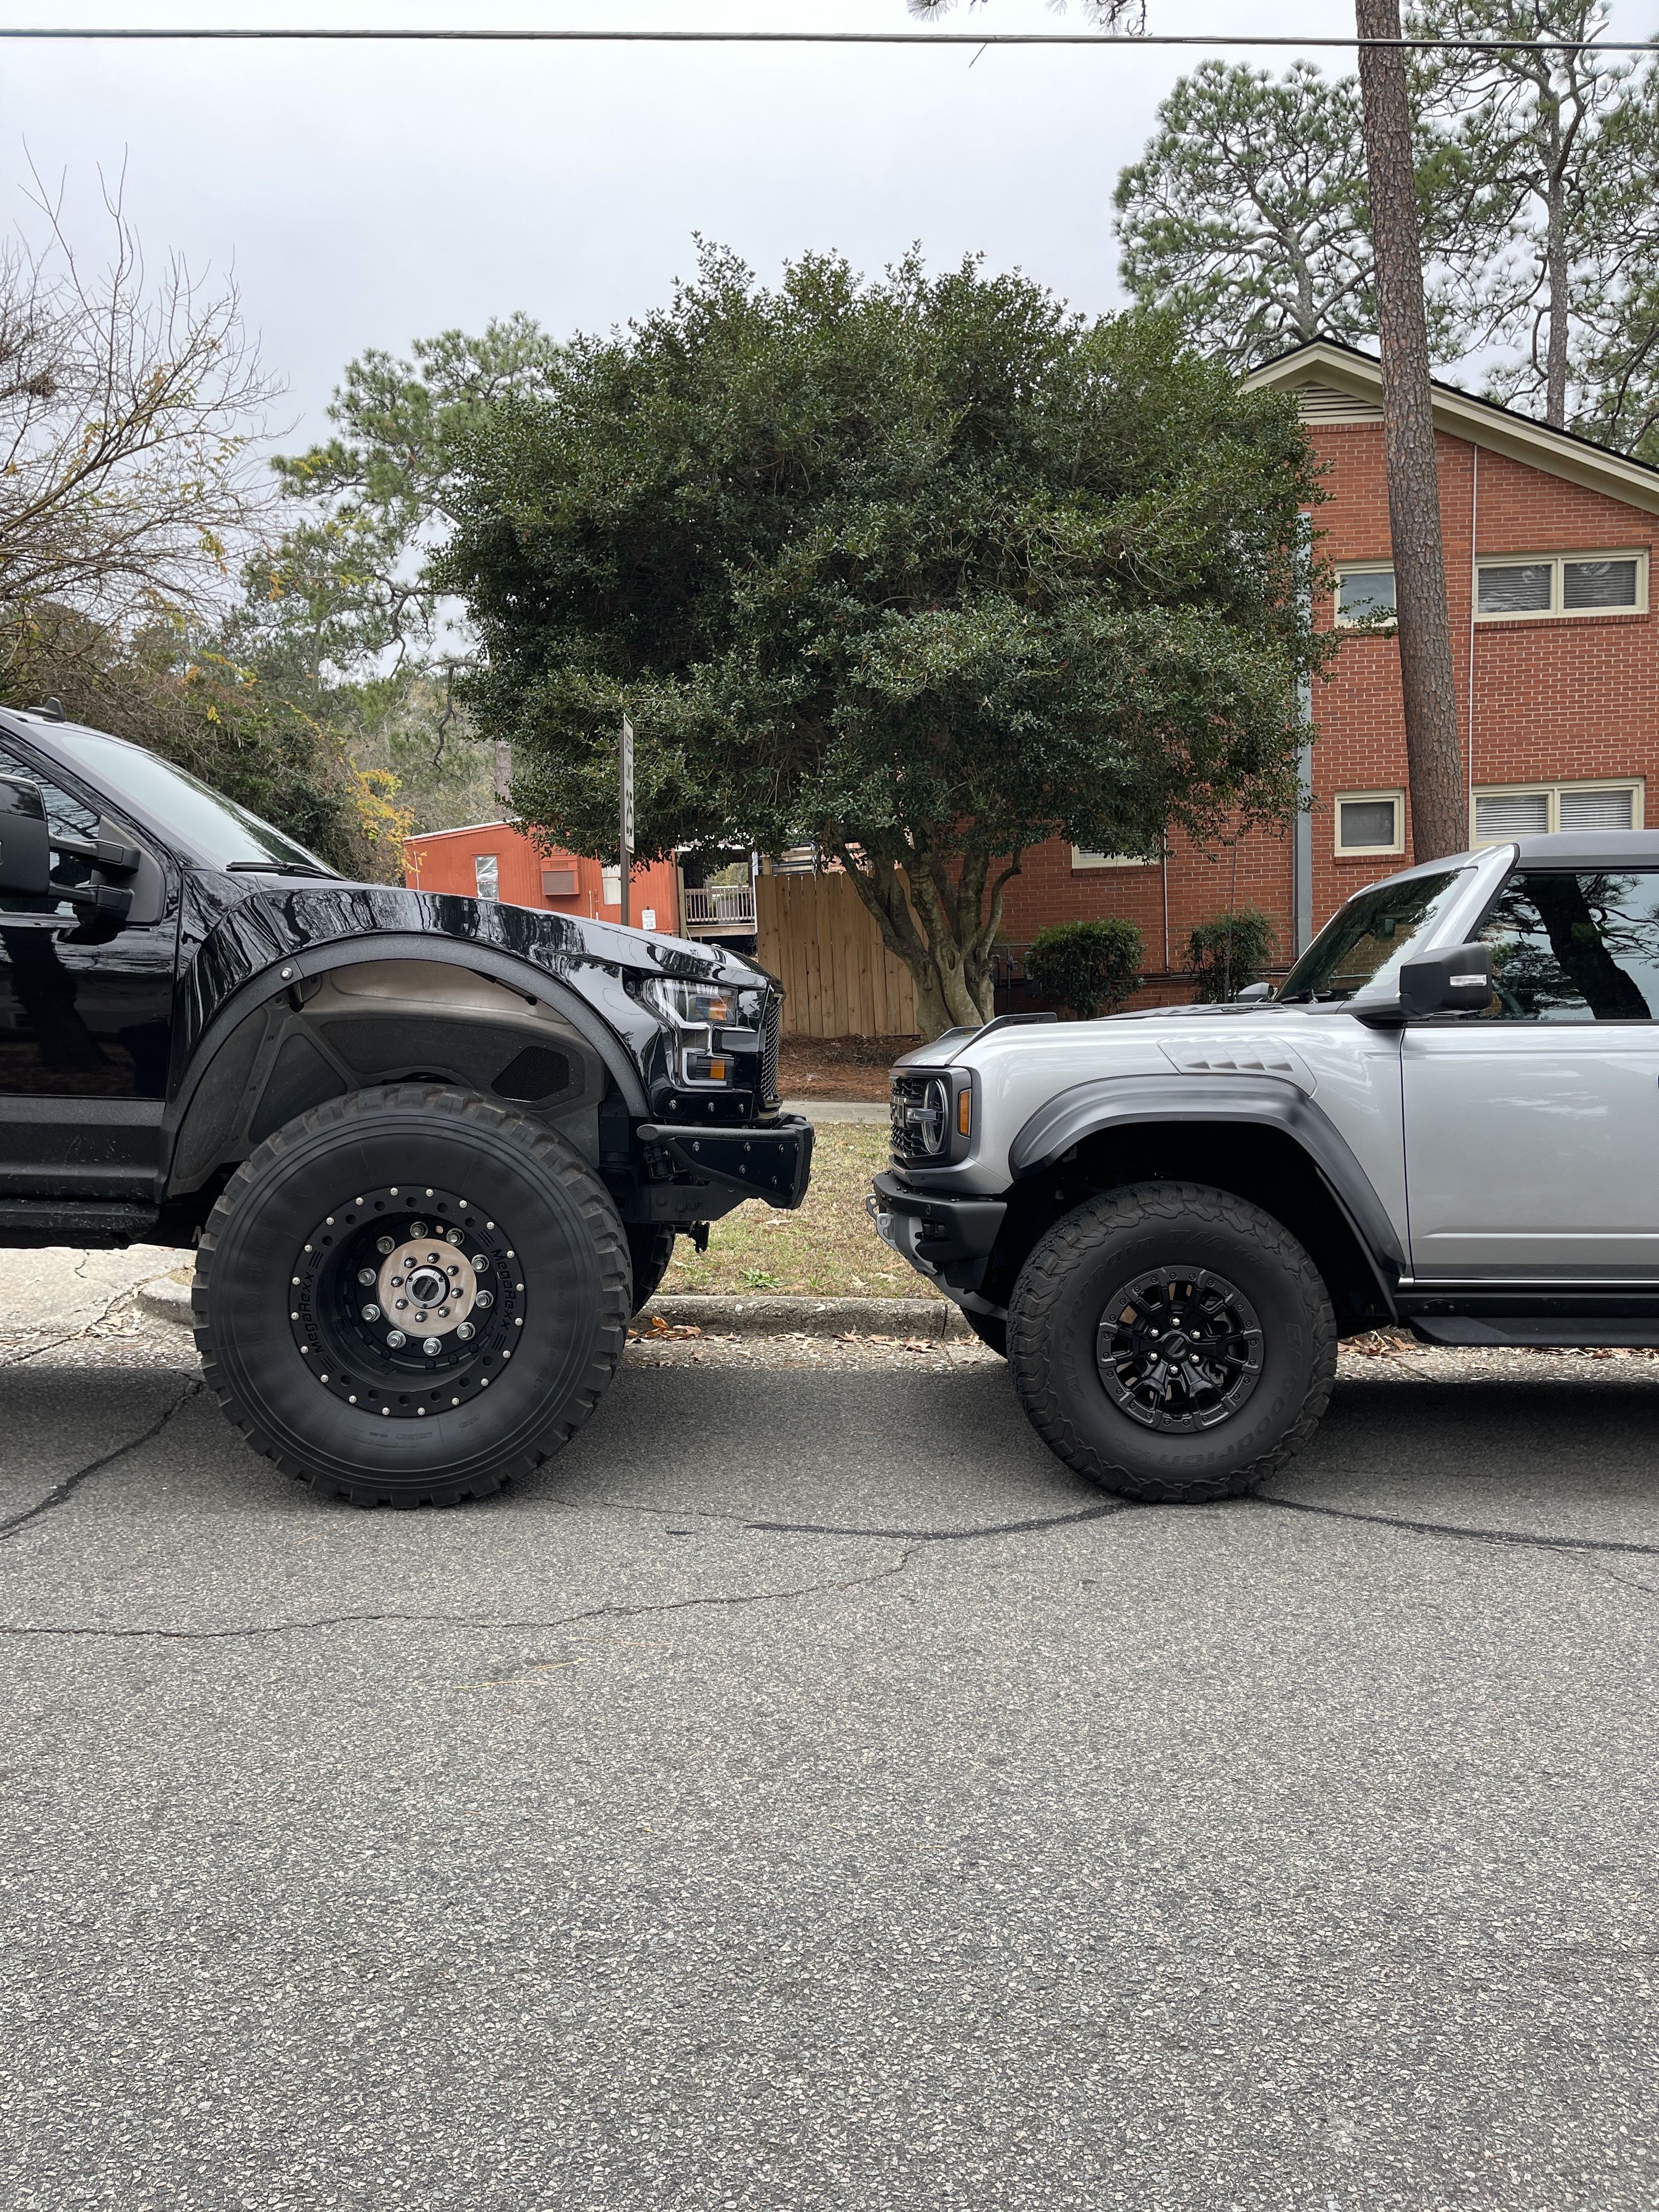 This Ford F-350 Mega Raptor Makes All Other Raptors Look Cute